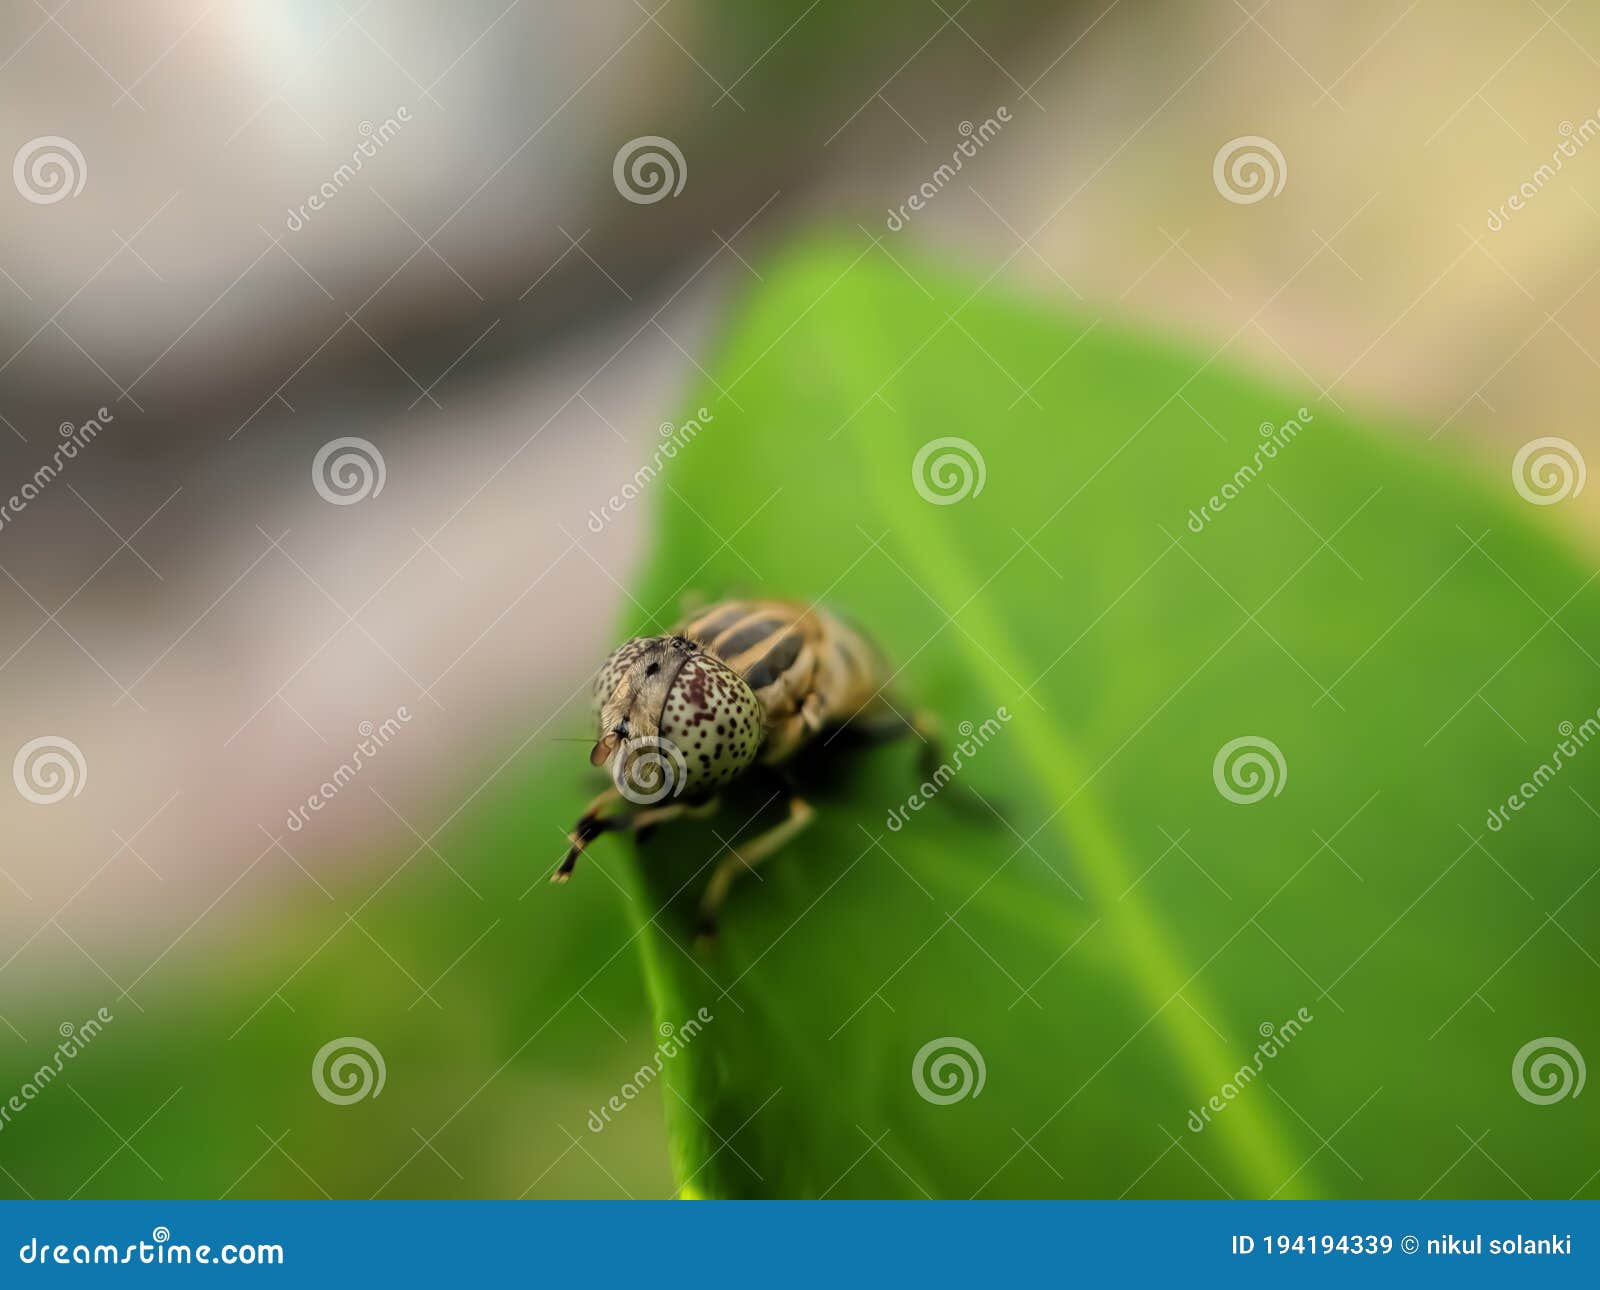 eristalinus aeneus is a species of hoverfly.insect micro and macro image of insect in indian village garden insect imageÃÂ 